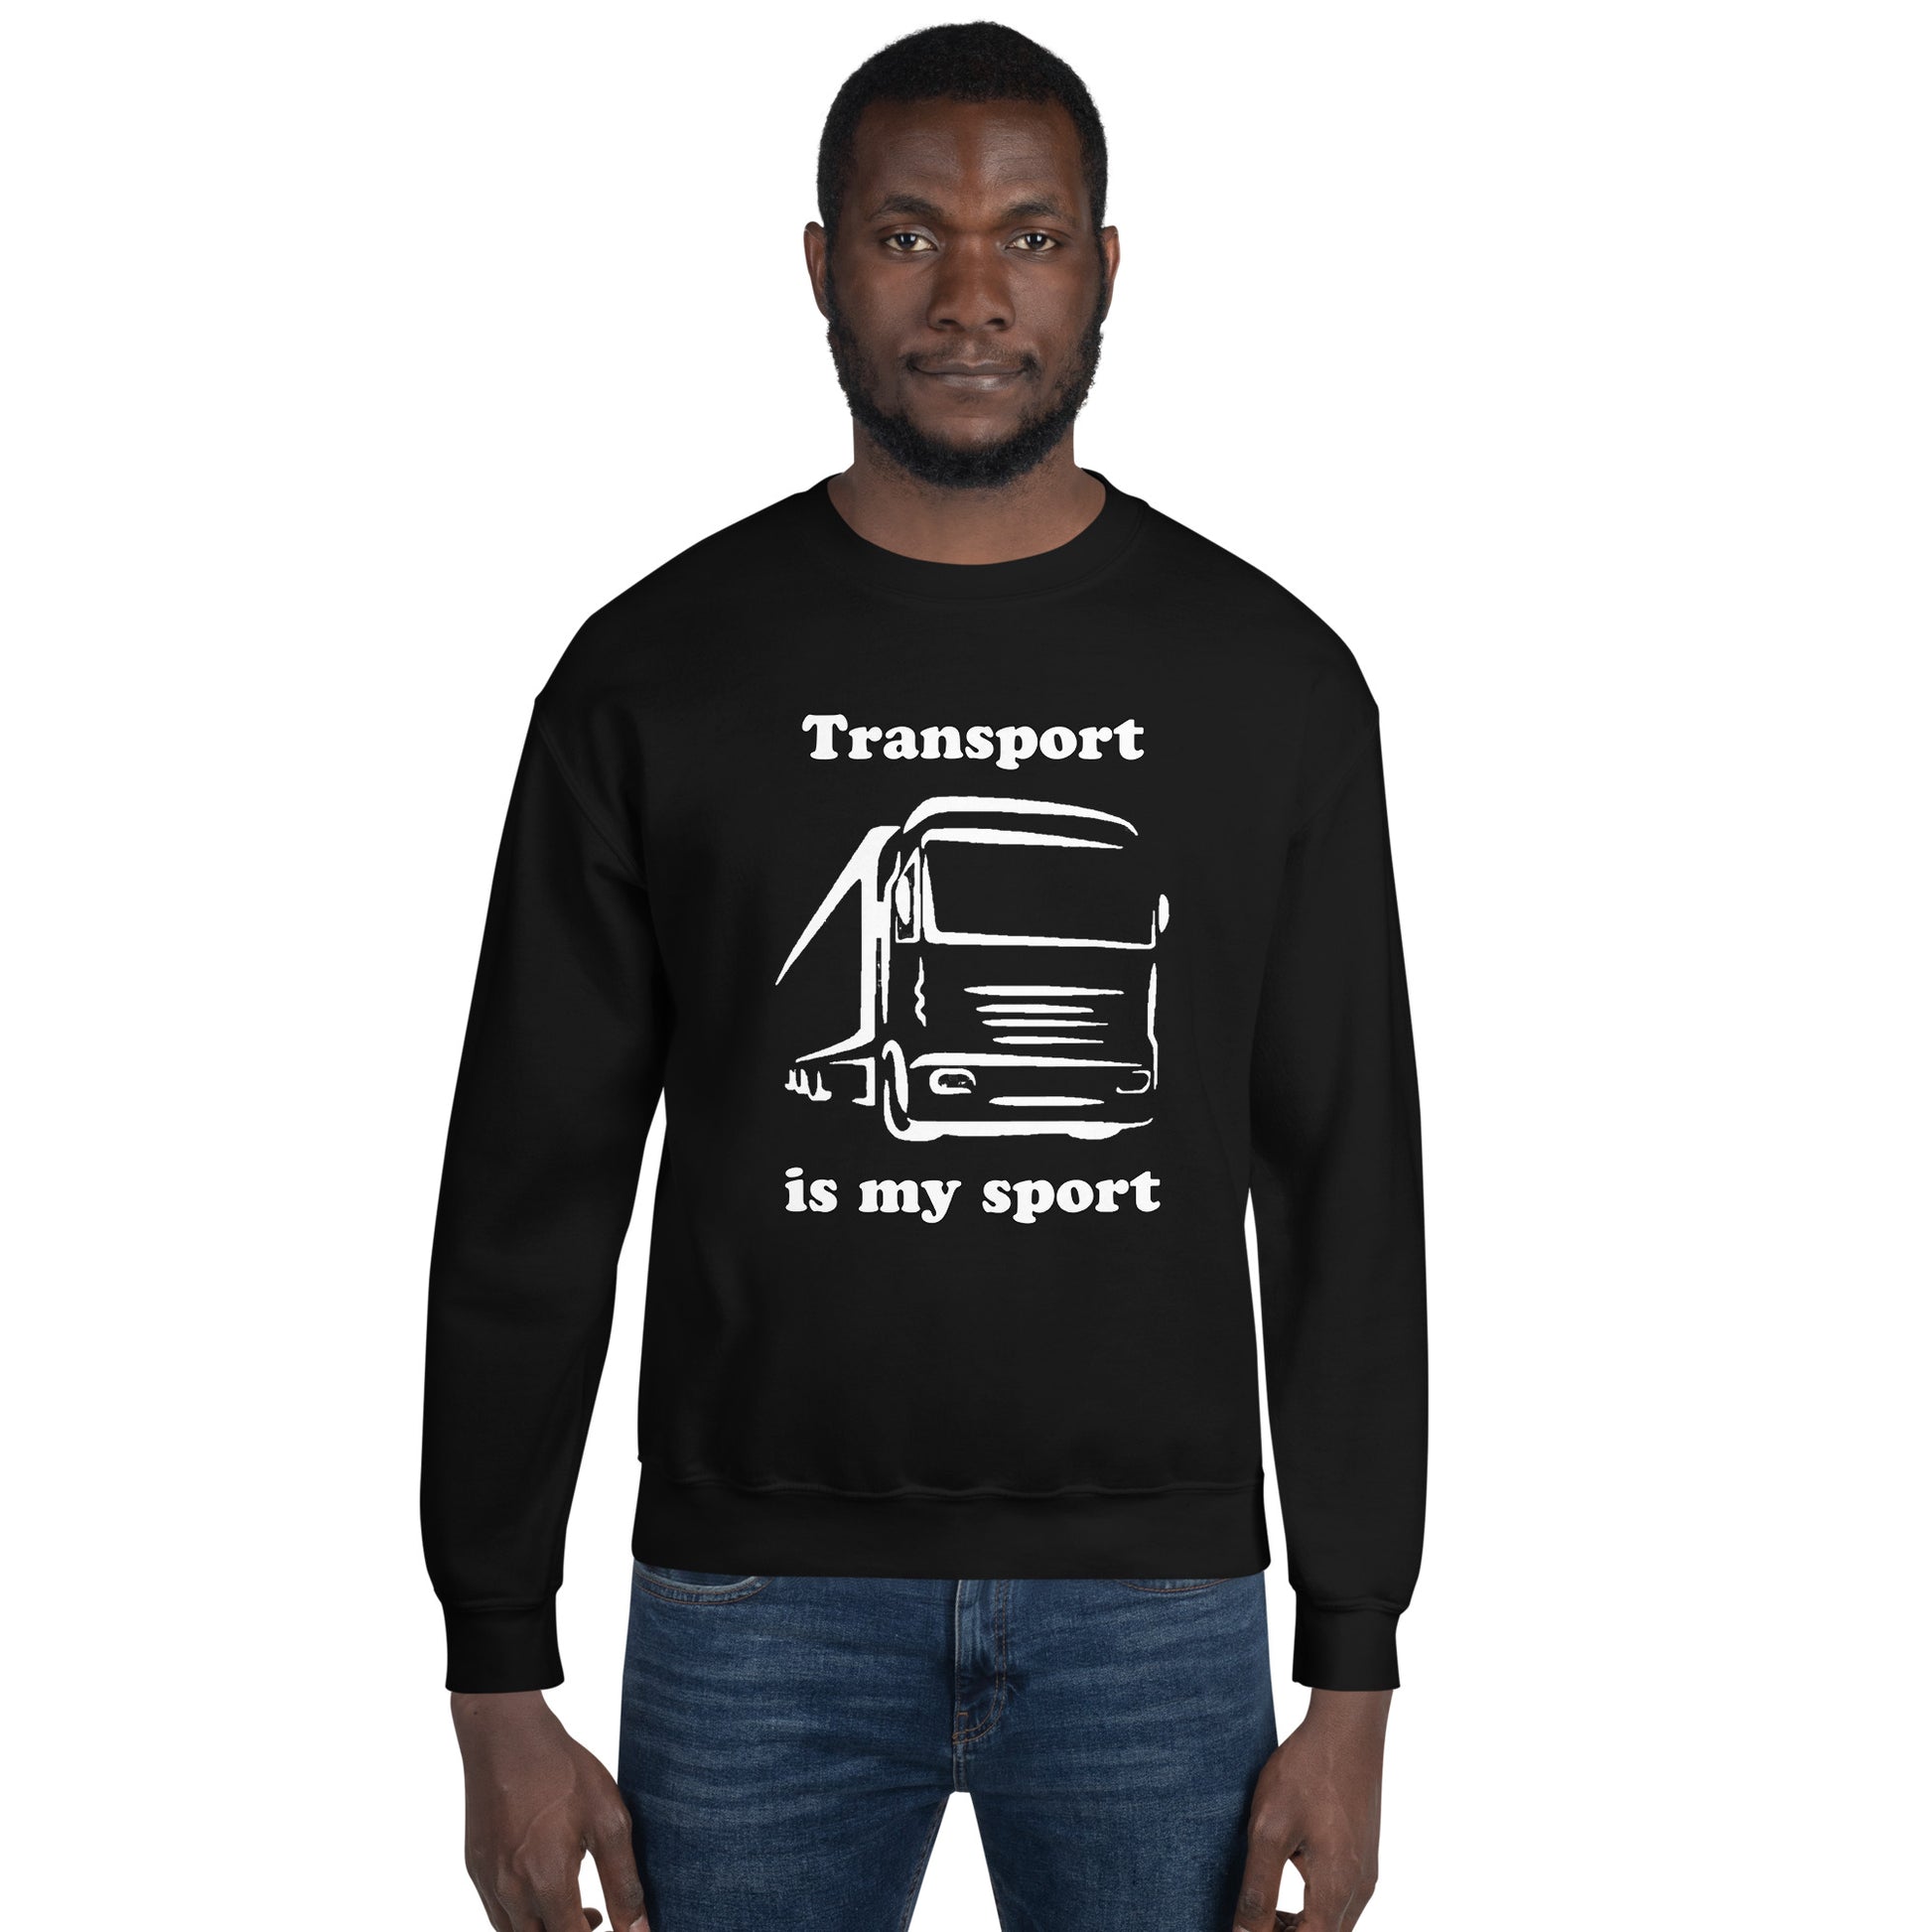 Man with black sweatshirt with picture of truck and text "Transport is my sport"